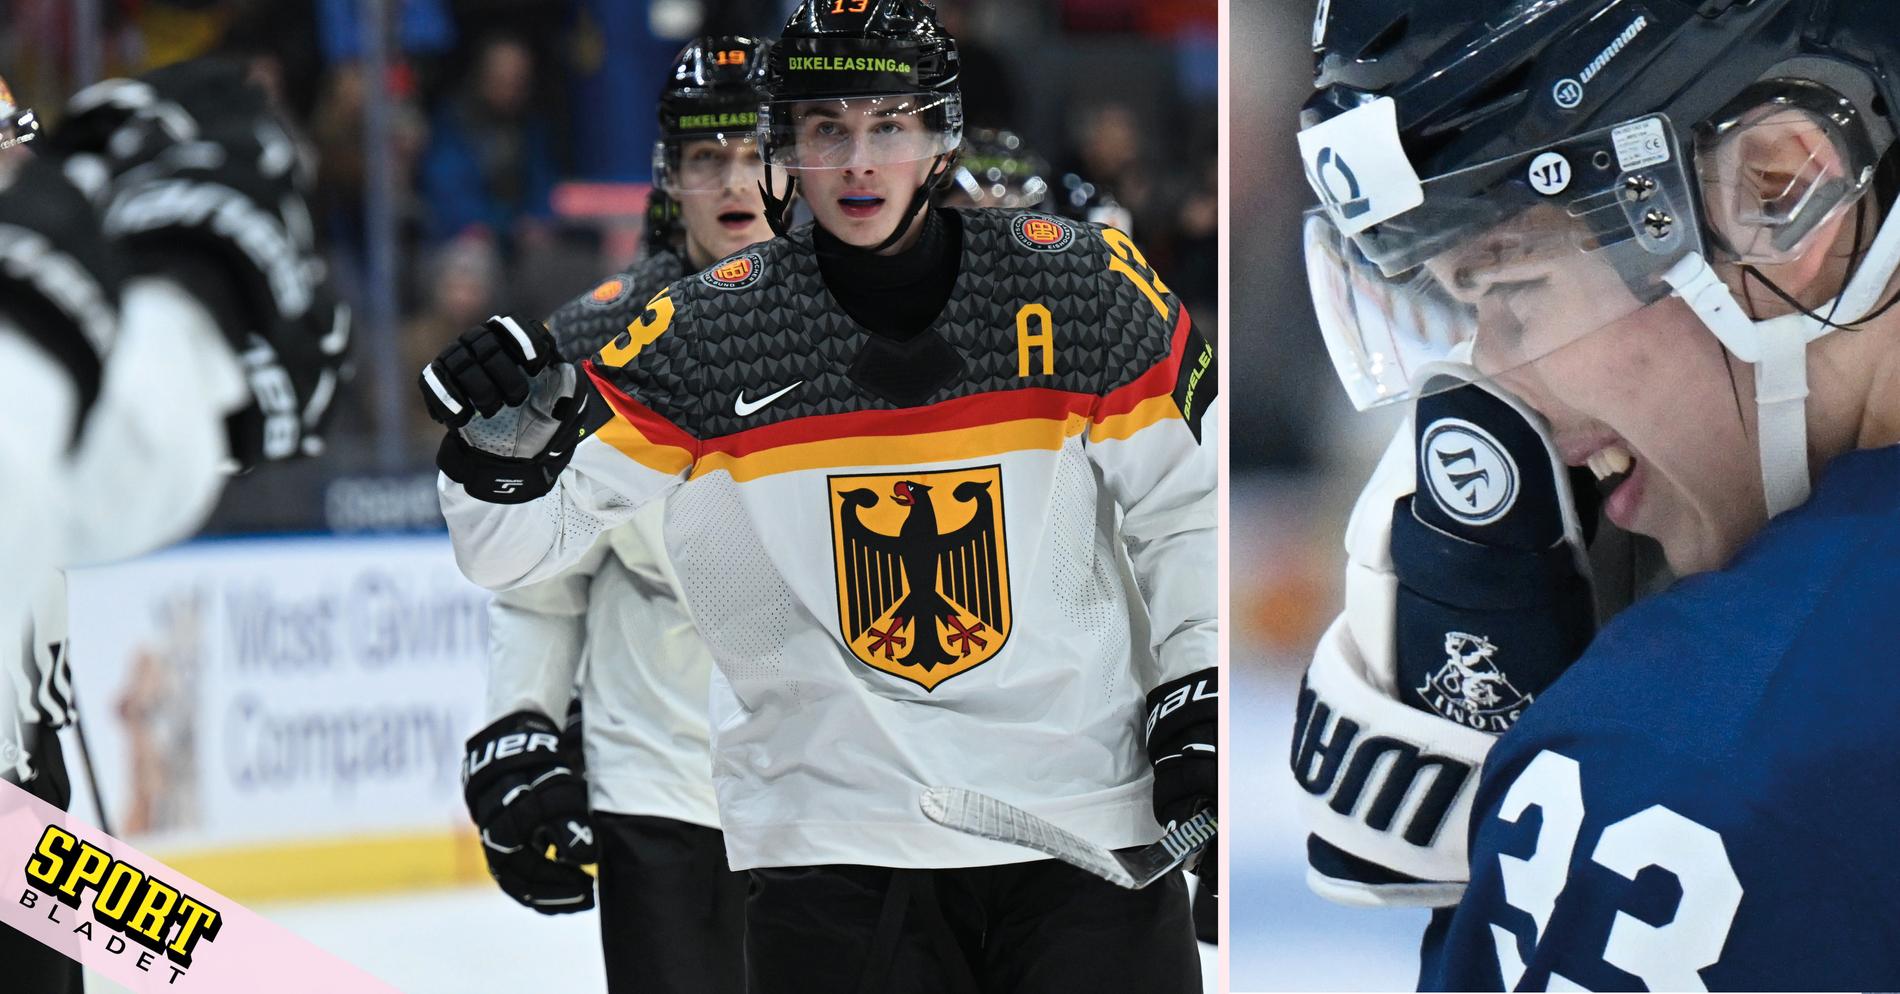 Finland’s Junior Lions Suffer First Giant Scare at Junior World Championship Against Germany